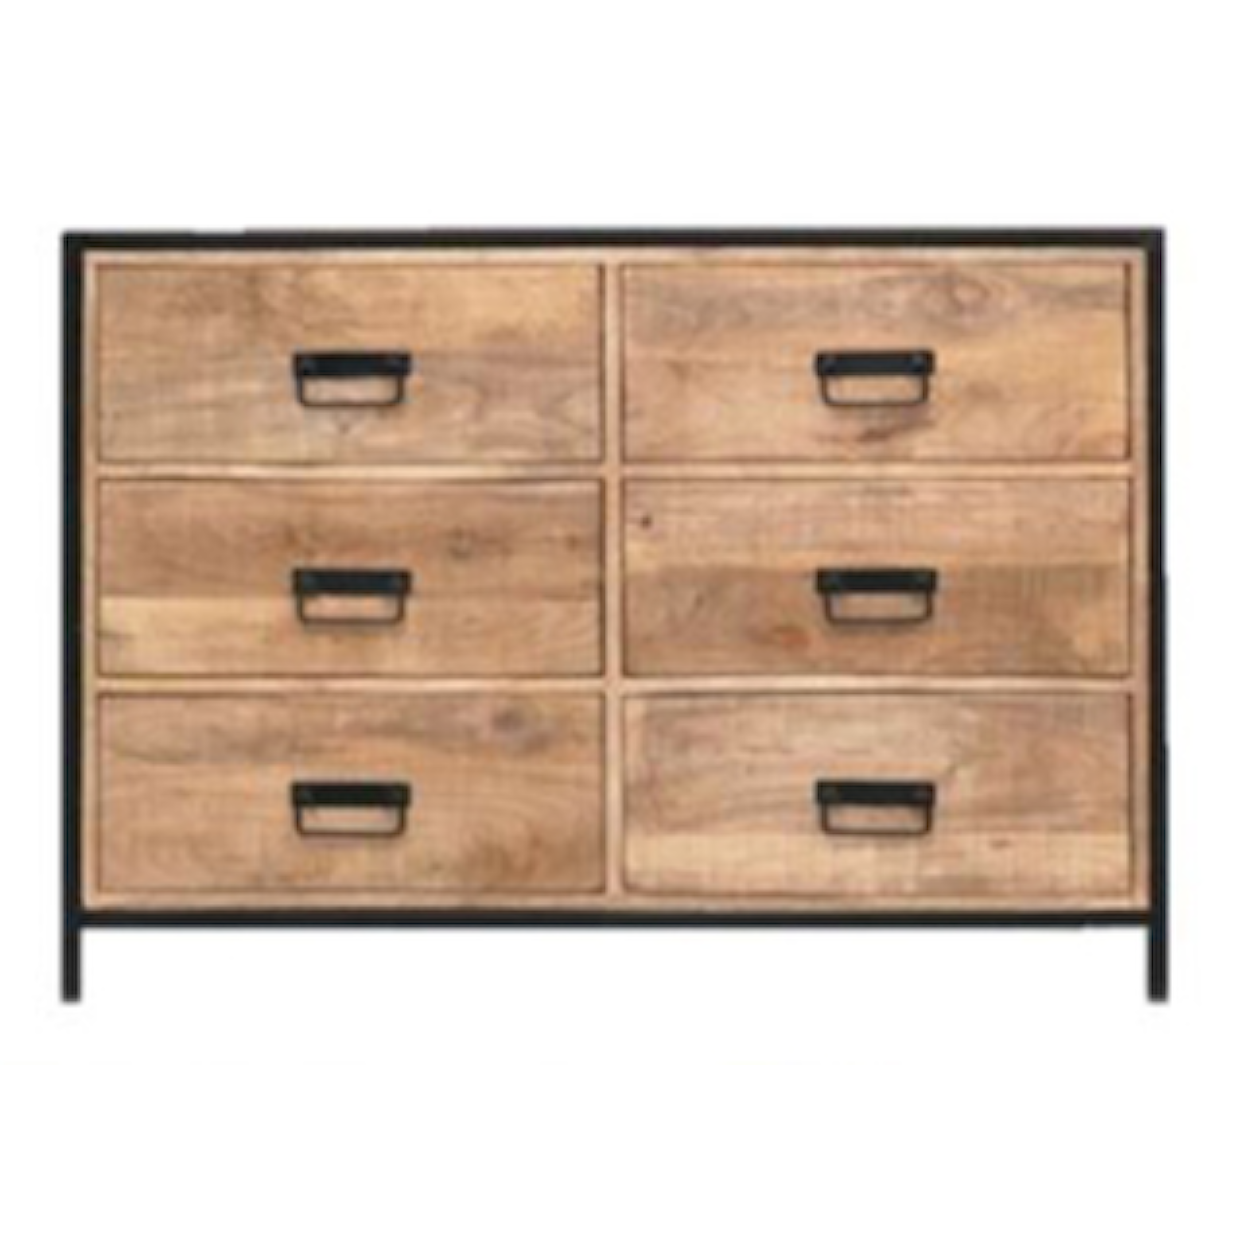 Carolina Chairs Outbound Drawer Chest